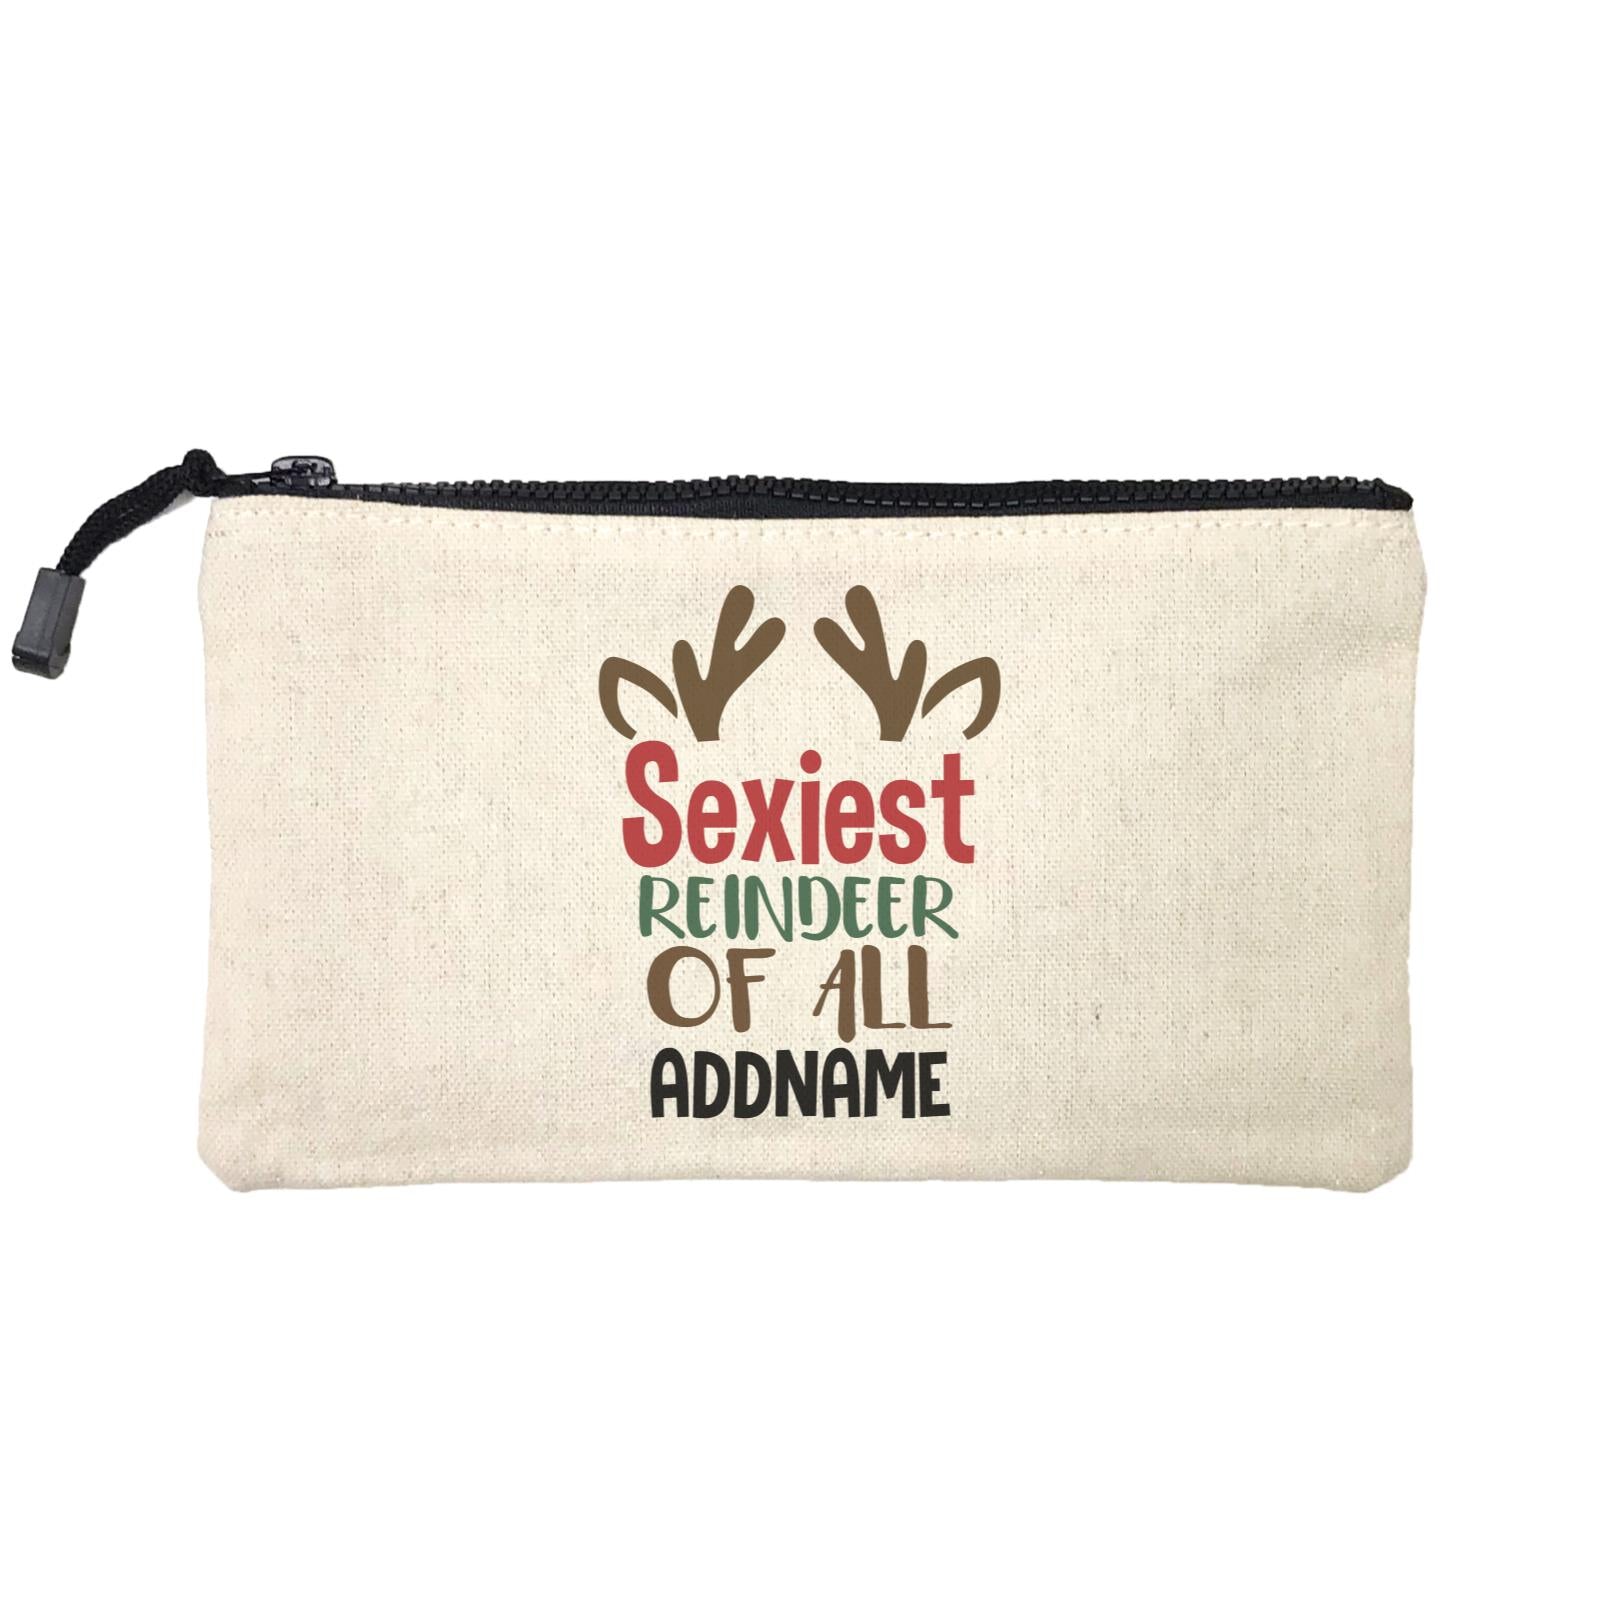 Xmas Sexiest Reindeer of All Mini Accessories Stationery Pouch